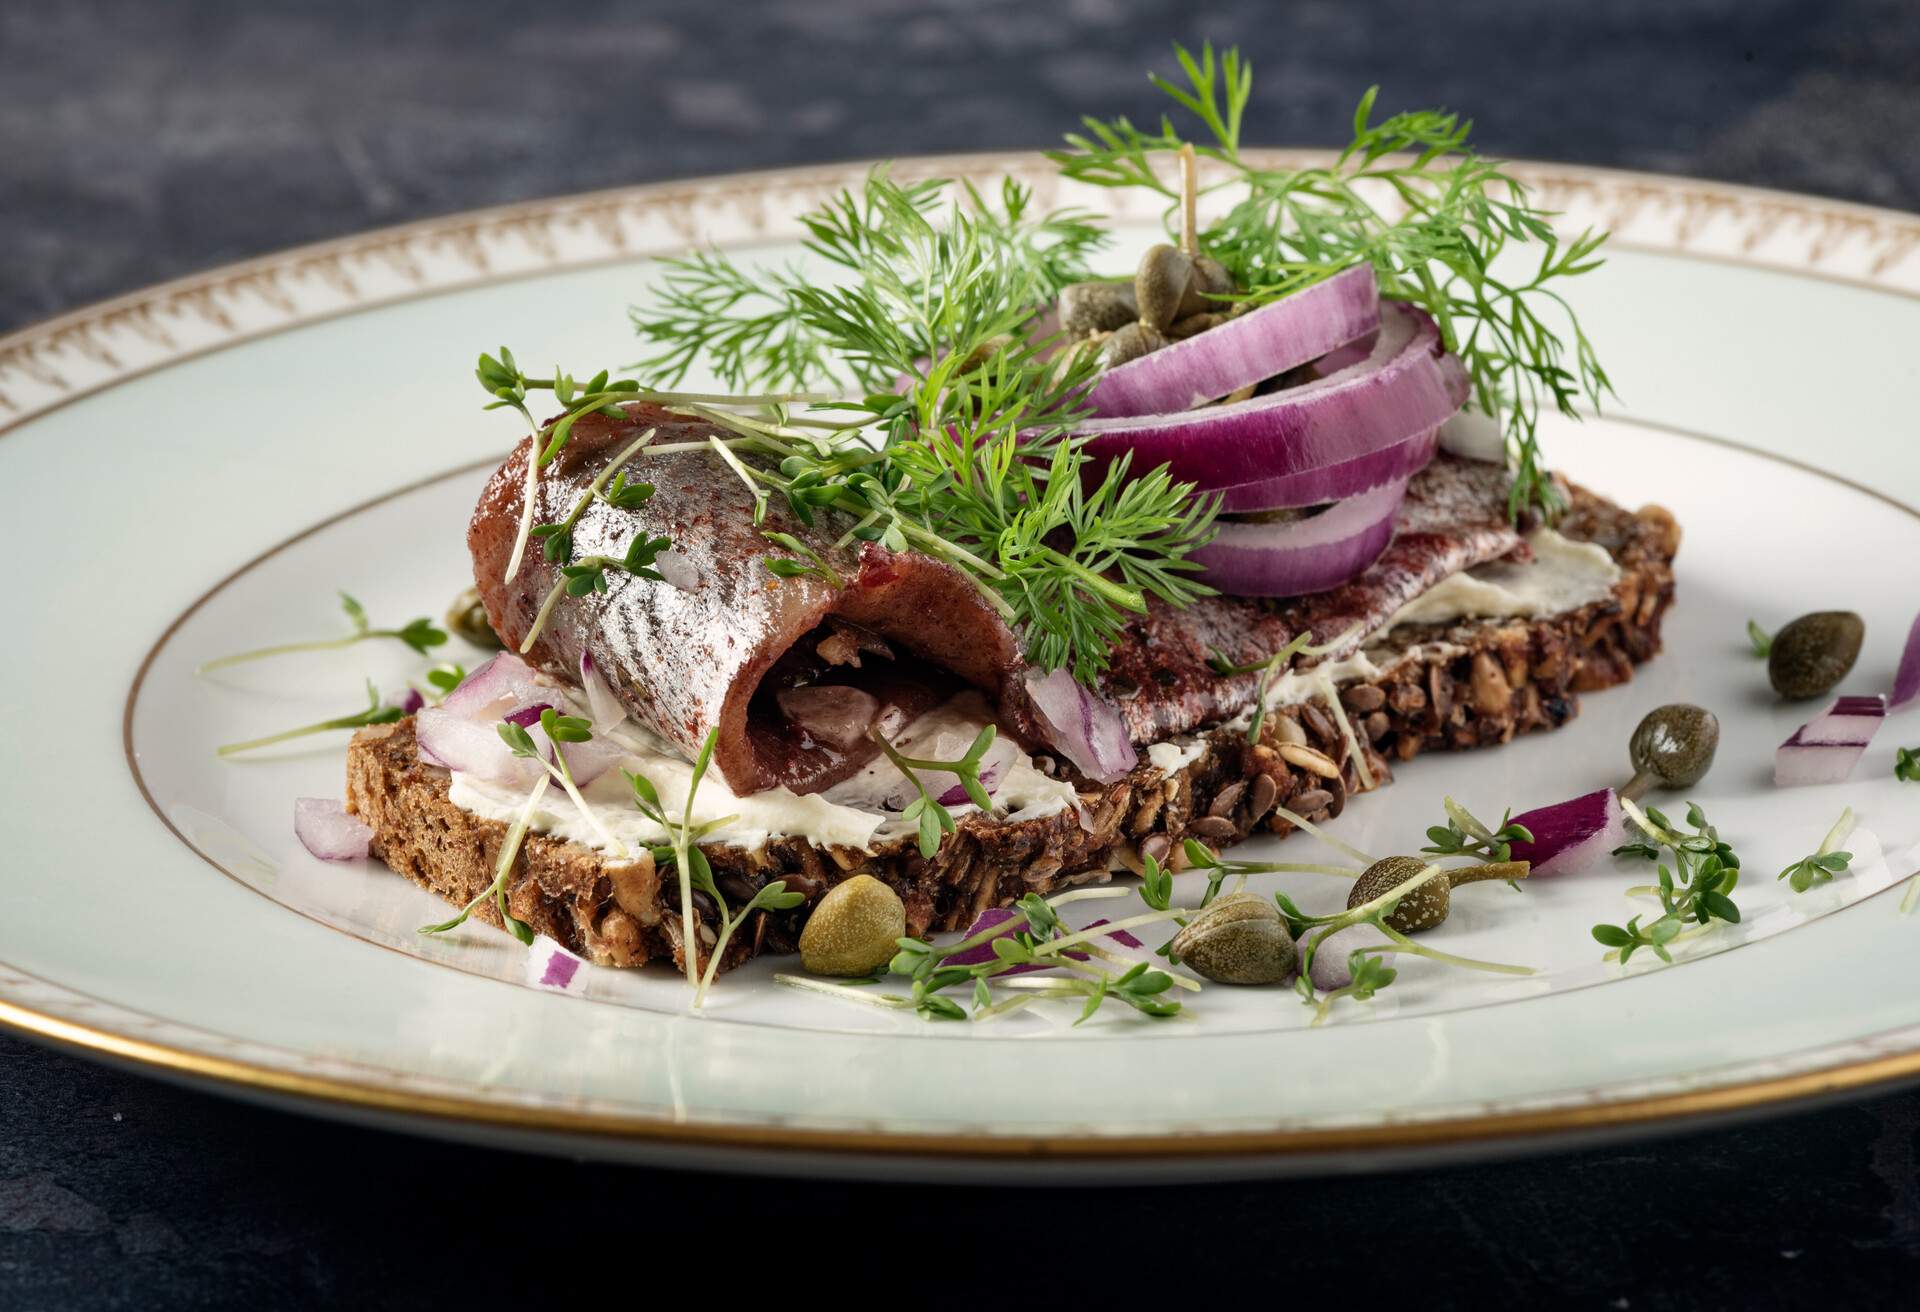 Traditional danish “smørrebrød” or open sandwich made with a slice of buttered rye bread, marinated herring, shavings of horseradish and topped with red onion, fresh dill and capers. Colour, horizontal format with some copy space. Smorrebrod are a staple of the danish food culture, a very popular choice for lunch or a light dinner. Toppings can be almost anything from roast beef to prawns but the rye bread at the bottom of the sandwich has to be good!